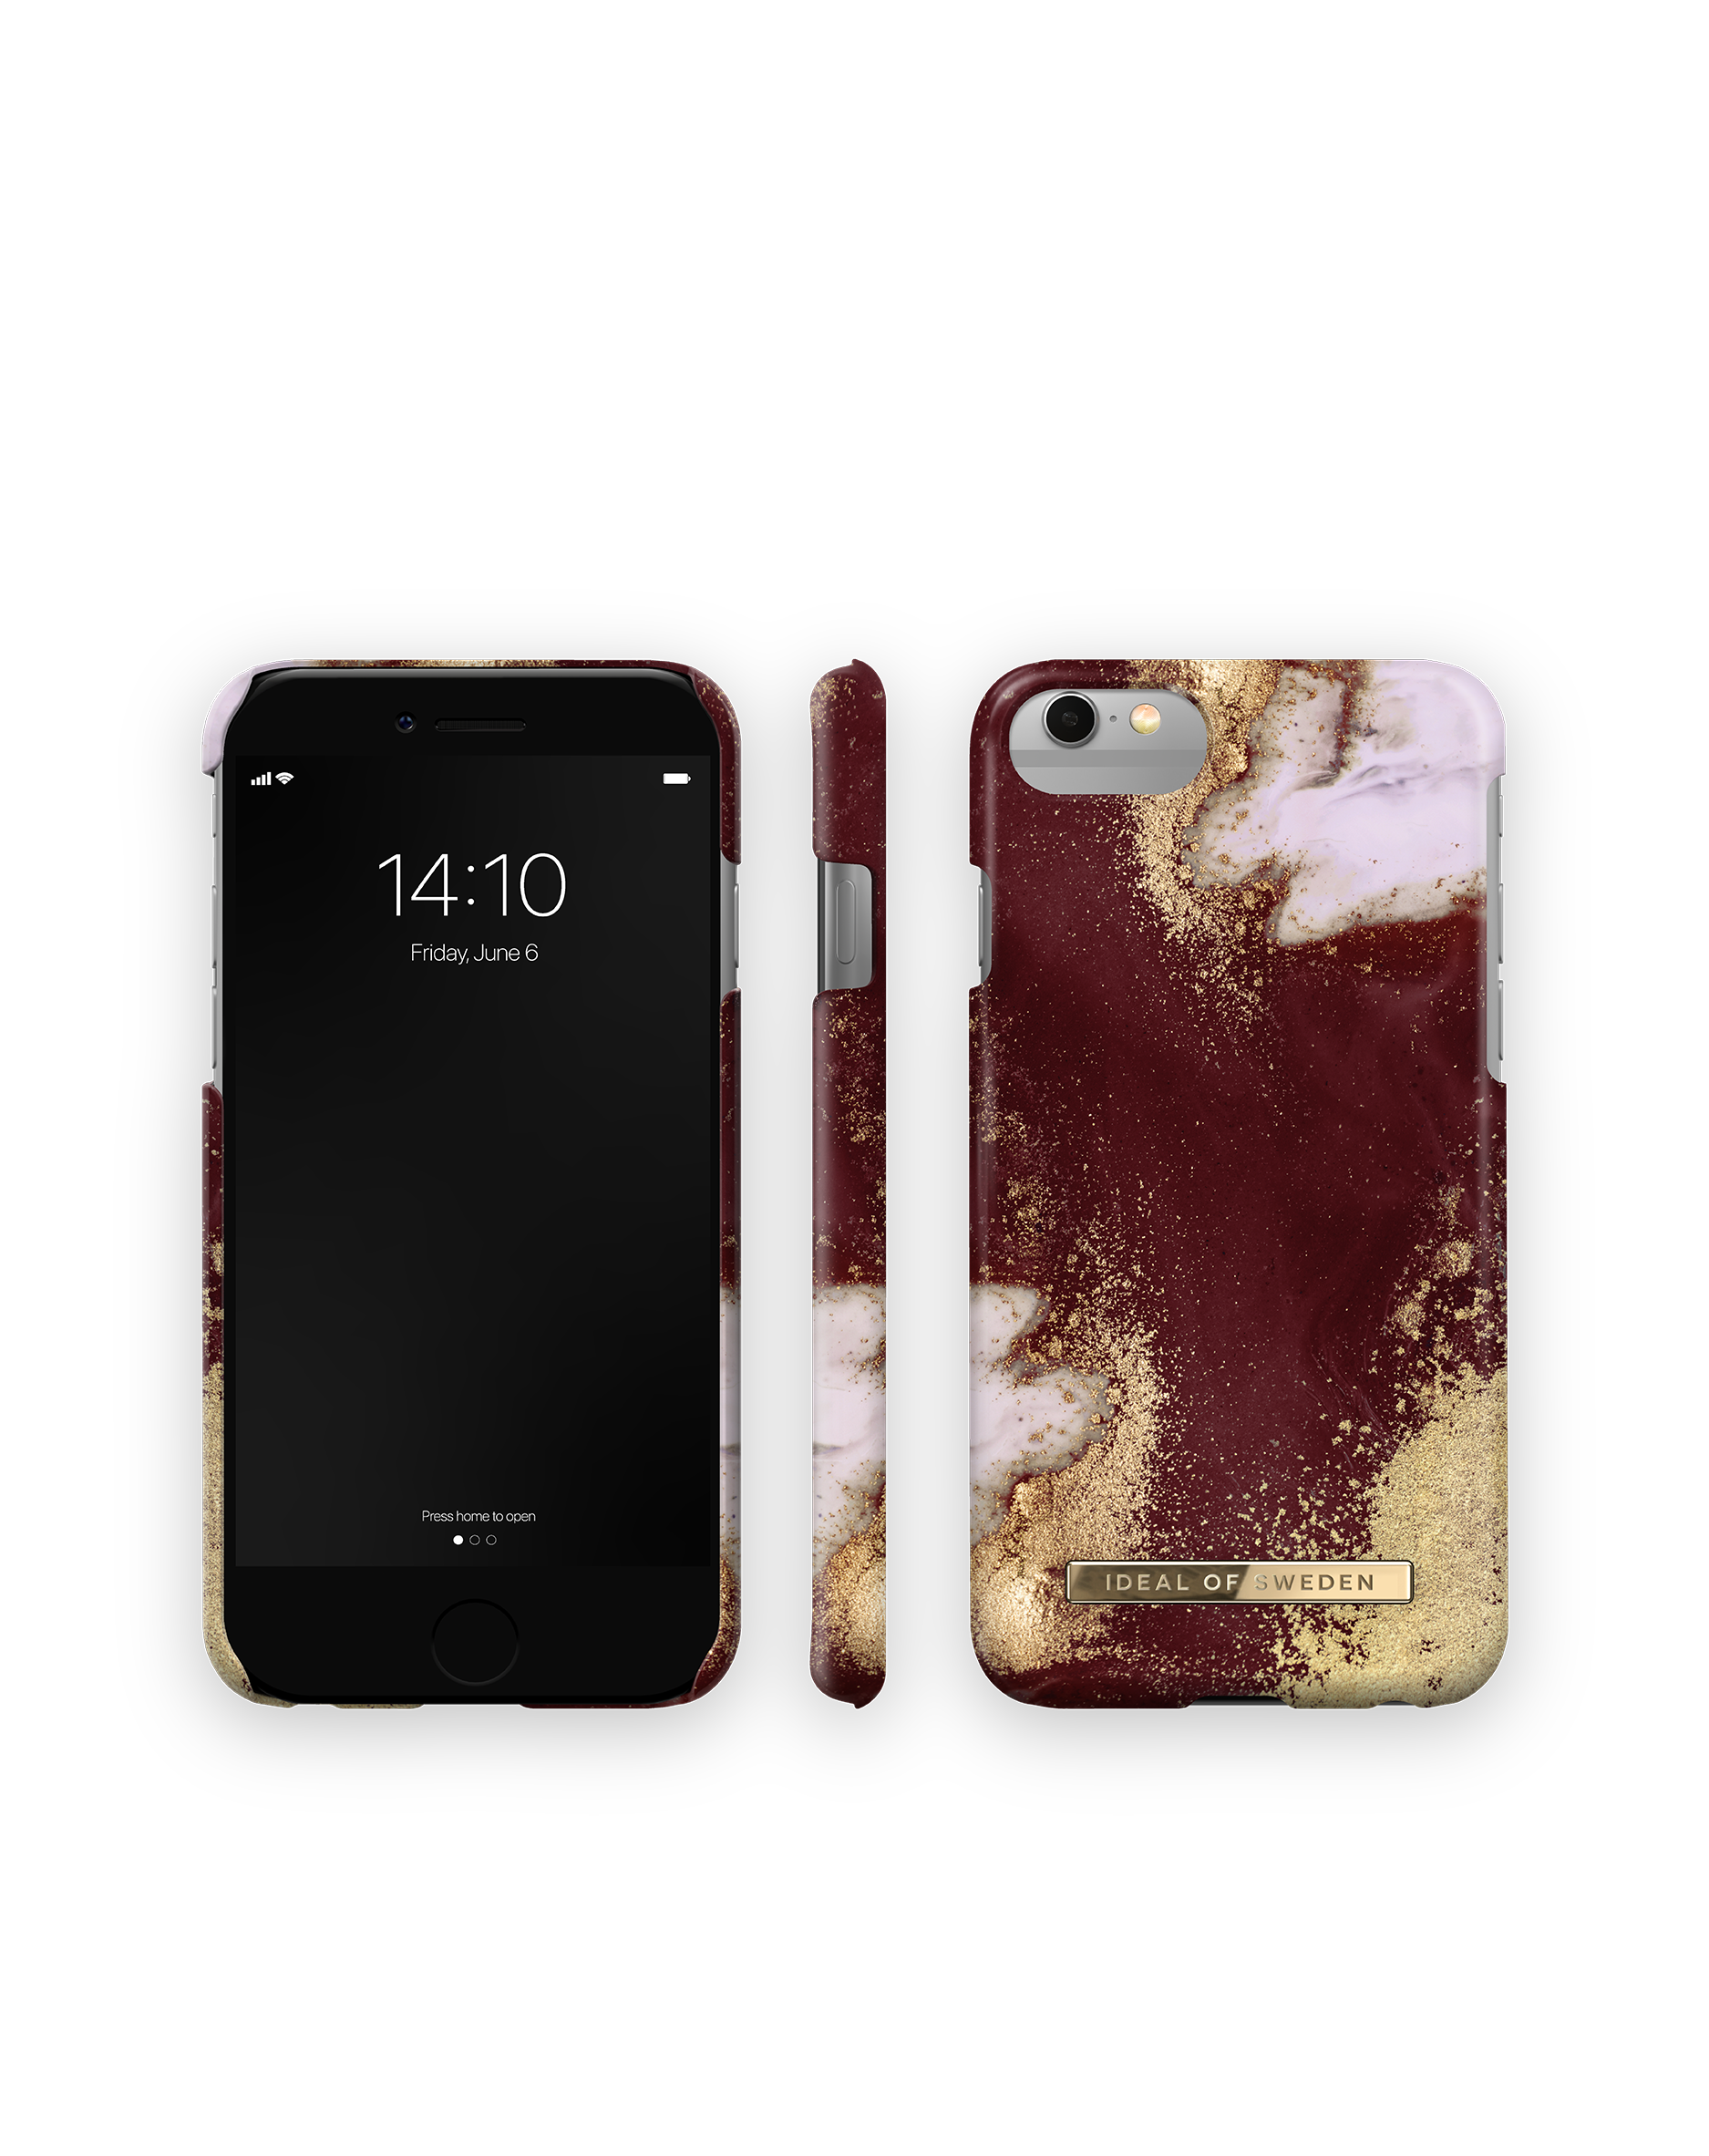 iPhone SWEDEN iPhone Apple, iPhone Backcover, Apple iPhone SE Marble 7, IDFCAW19-I7-149, IDEAL Apple OF Apple (2020), Burgundy 8, Apple 6(S), Golden